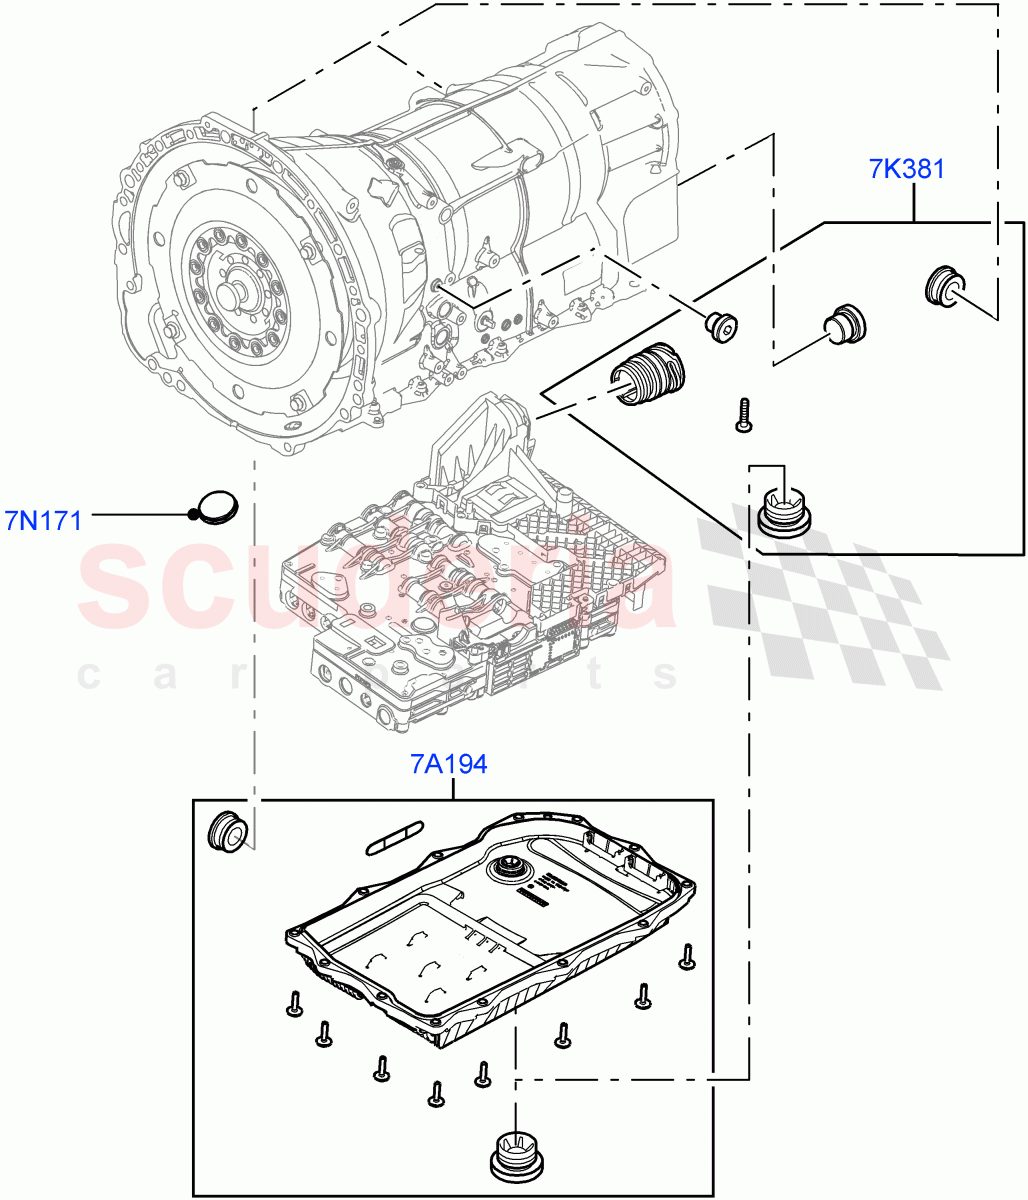 Transmission External Components(Solihull Plant Build)(2.0L I4 DSL HIGH DOHC AJ200,8 Speed Auto Trans ZF 8HP70 4WD)((V)FROMHA000001) of Land Rover Land Rover Range Rover Sport (2014+) [2.0 Turbo Petrol GTDI]